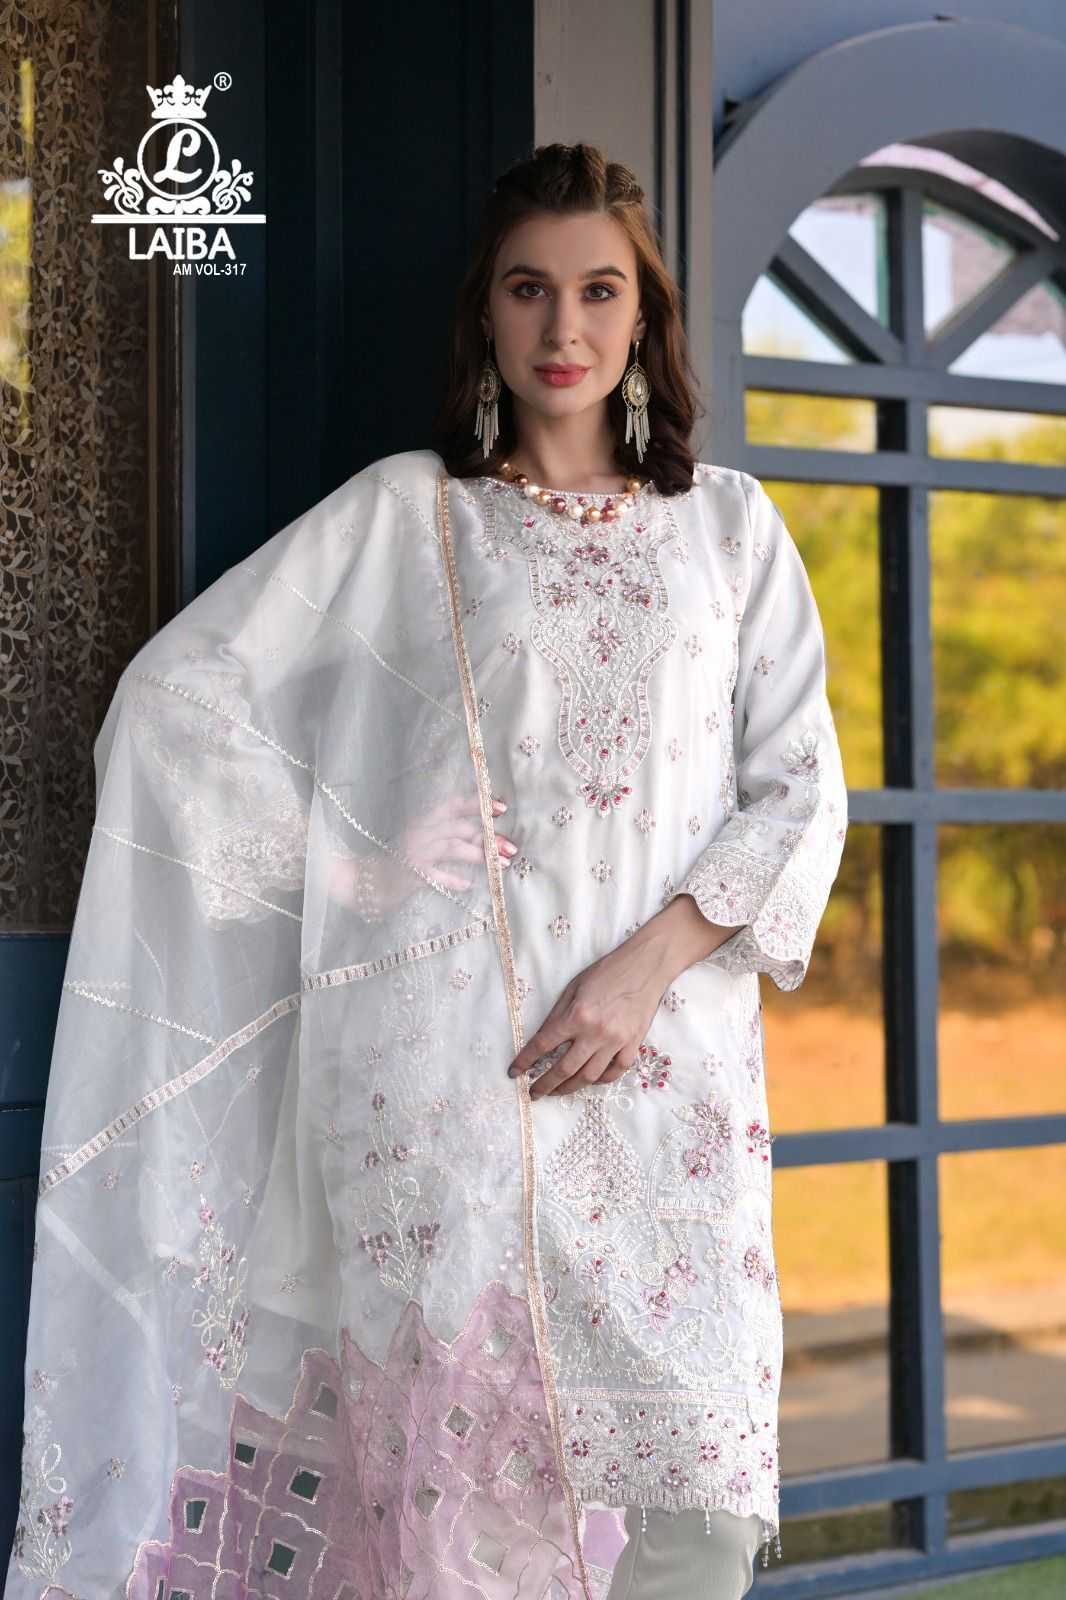 laiba designer vol 317 full stitched dress with embroidery handwork